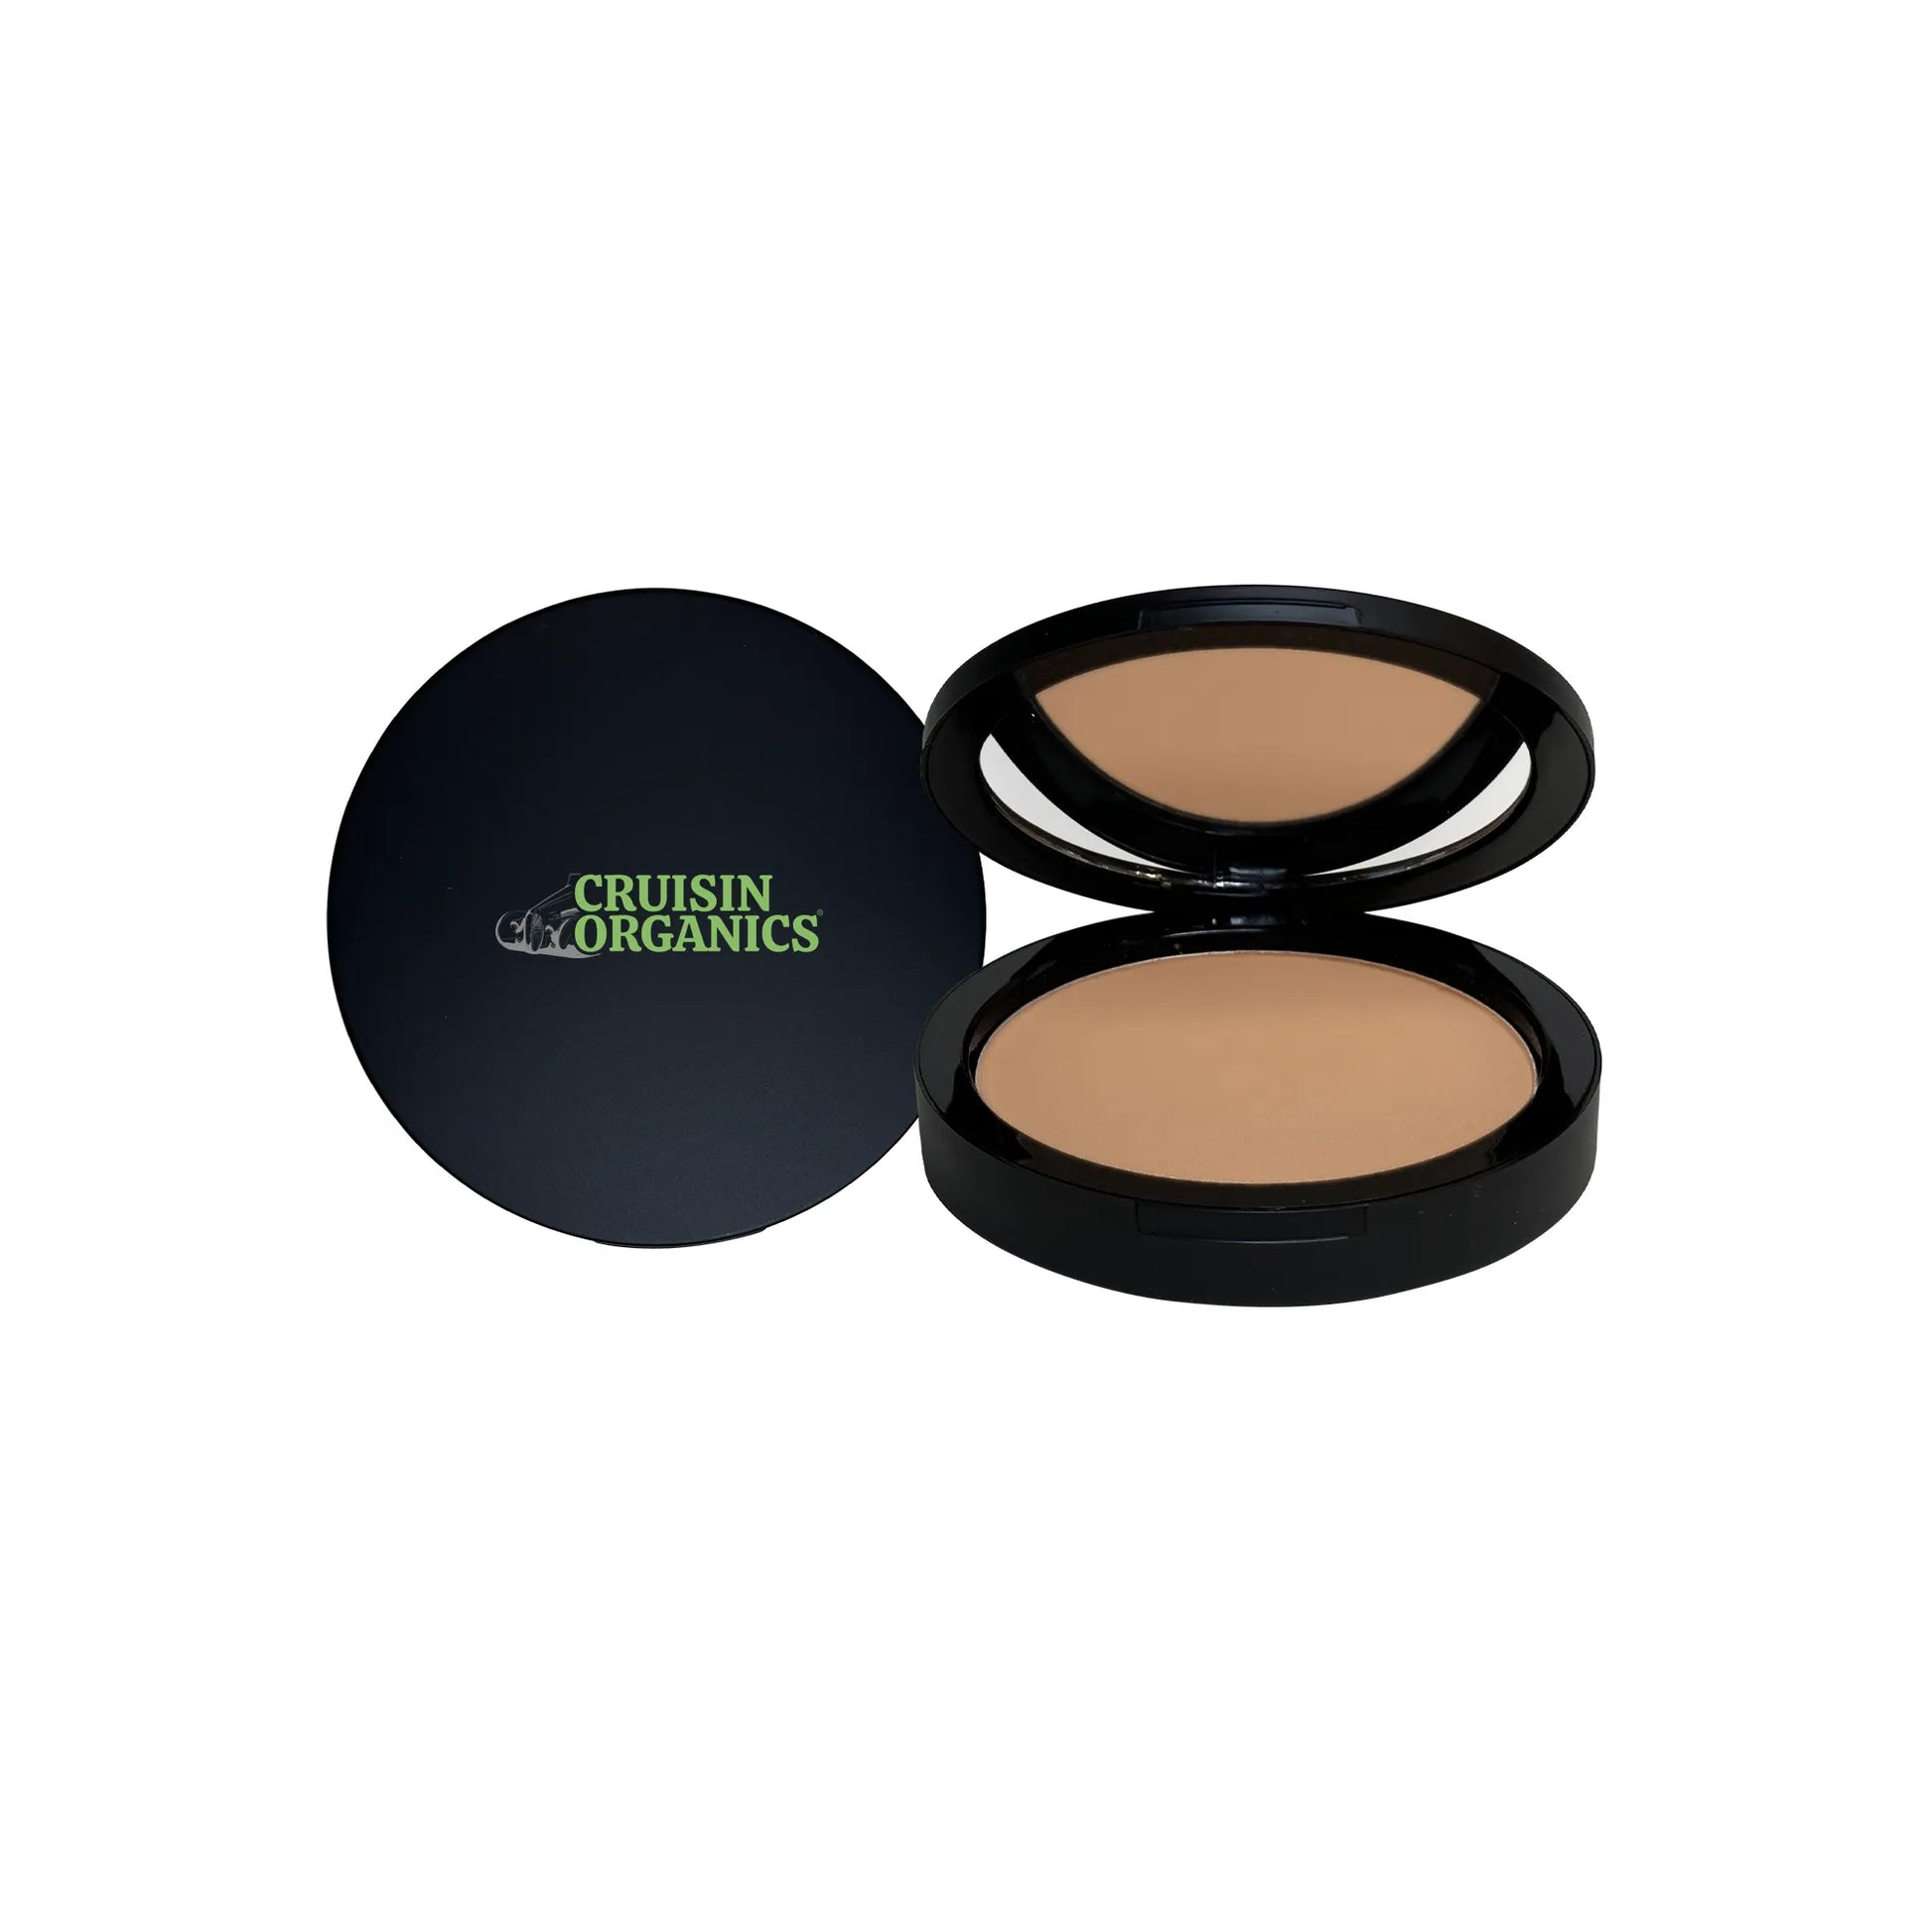 Discover the power of our dual Cruisin Organics Royal blend powder foundation. Apply dry as a powder or wet as a foundation with a matte, sleek finish. Adjustable and blends from light to full coverage, our dual powder foundation comes in a sleek compact to take with you to work, school and quick refreshenr for parties or a night out with the girls. With a weightless feel, our powder foundation is suitable for all skin types and will give you an effortless coverage and glow!